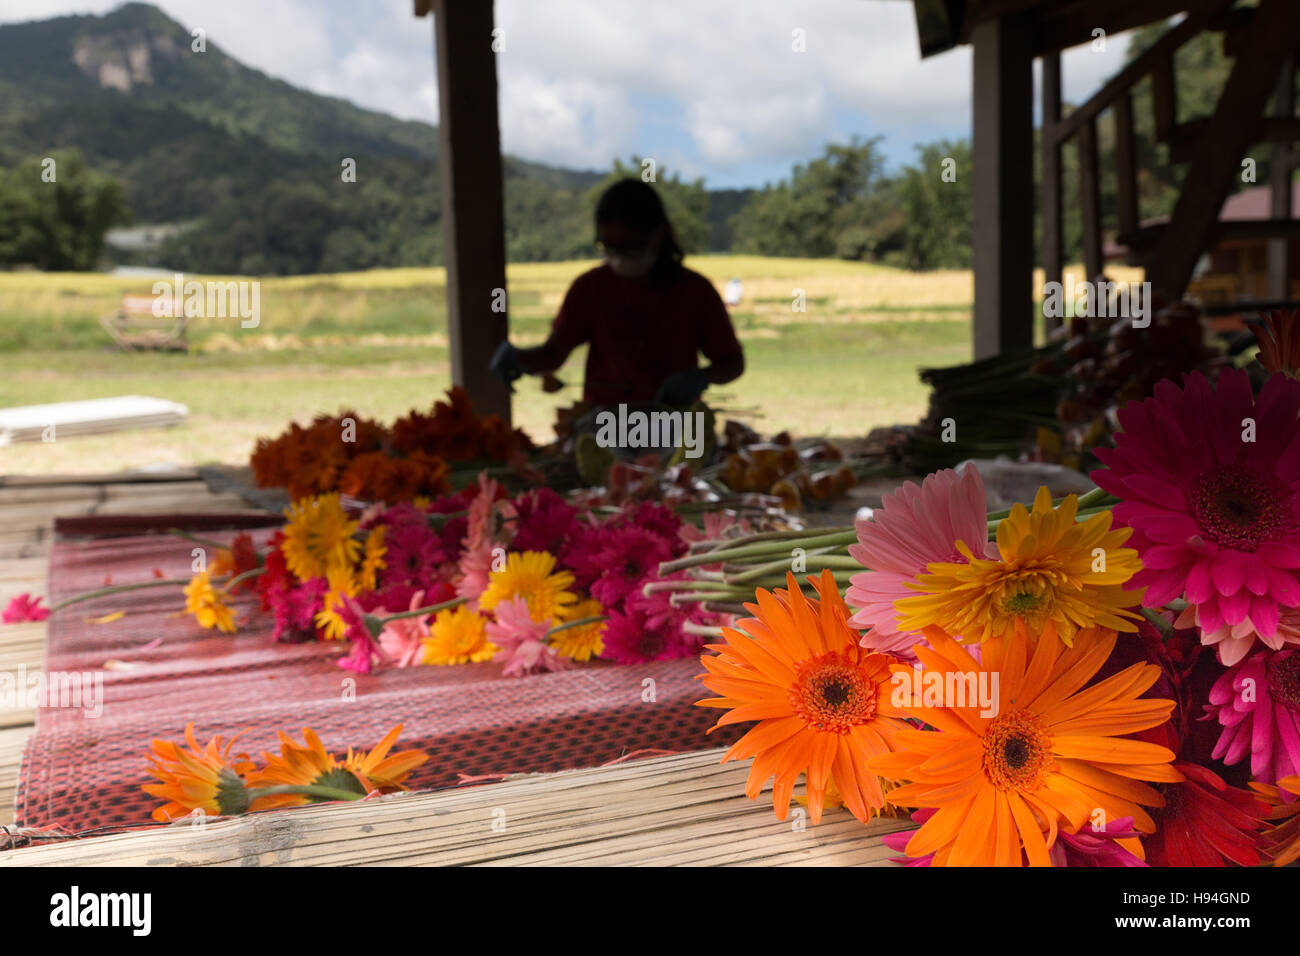 Chiang Mai, Thailand - November 4, 2016: woman arranging and tendering flowers for sale in Baan Mae Klang Luang in Chiang Mai, Thailand on November 4, Stock Photo